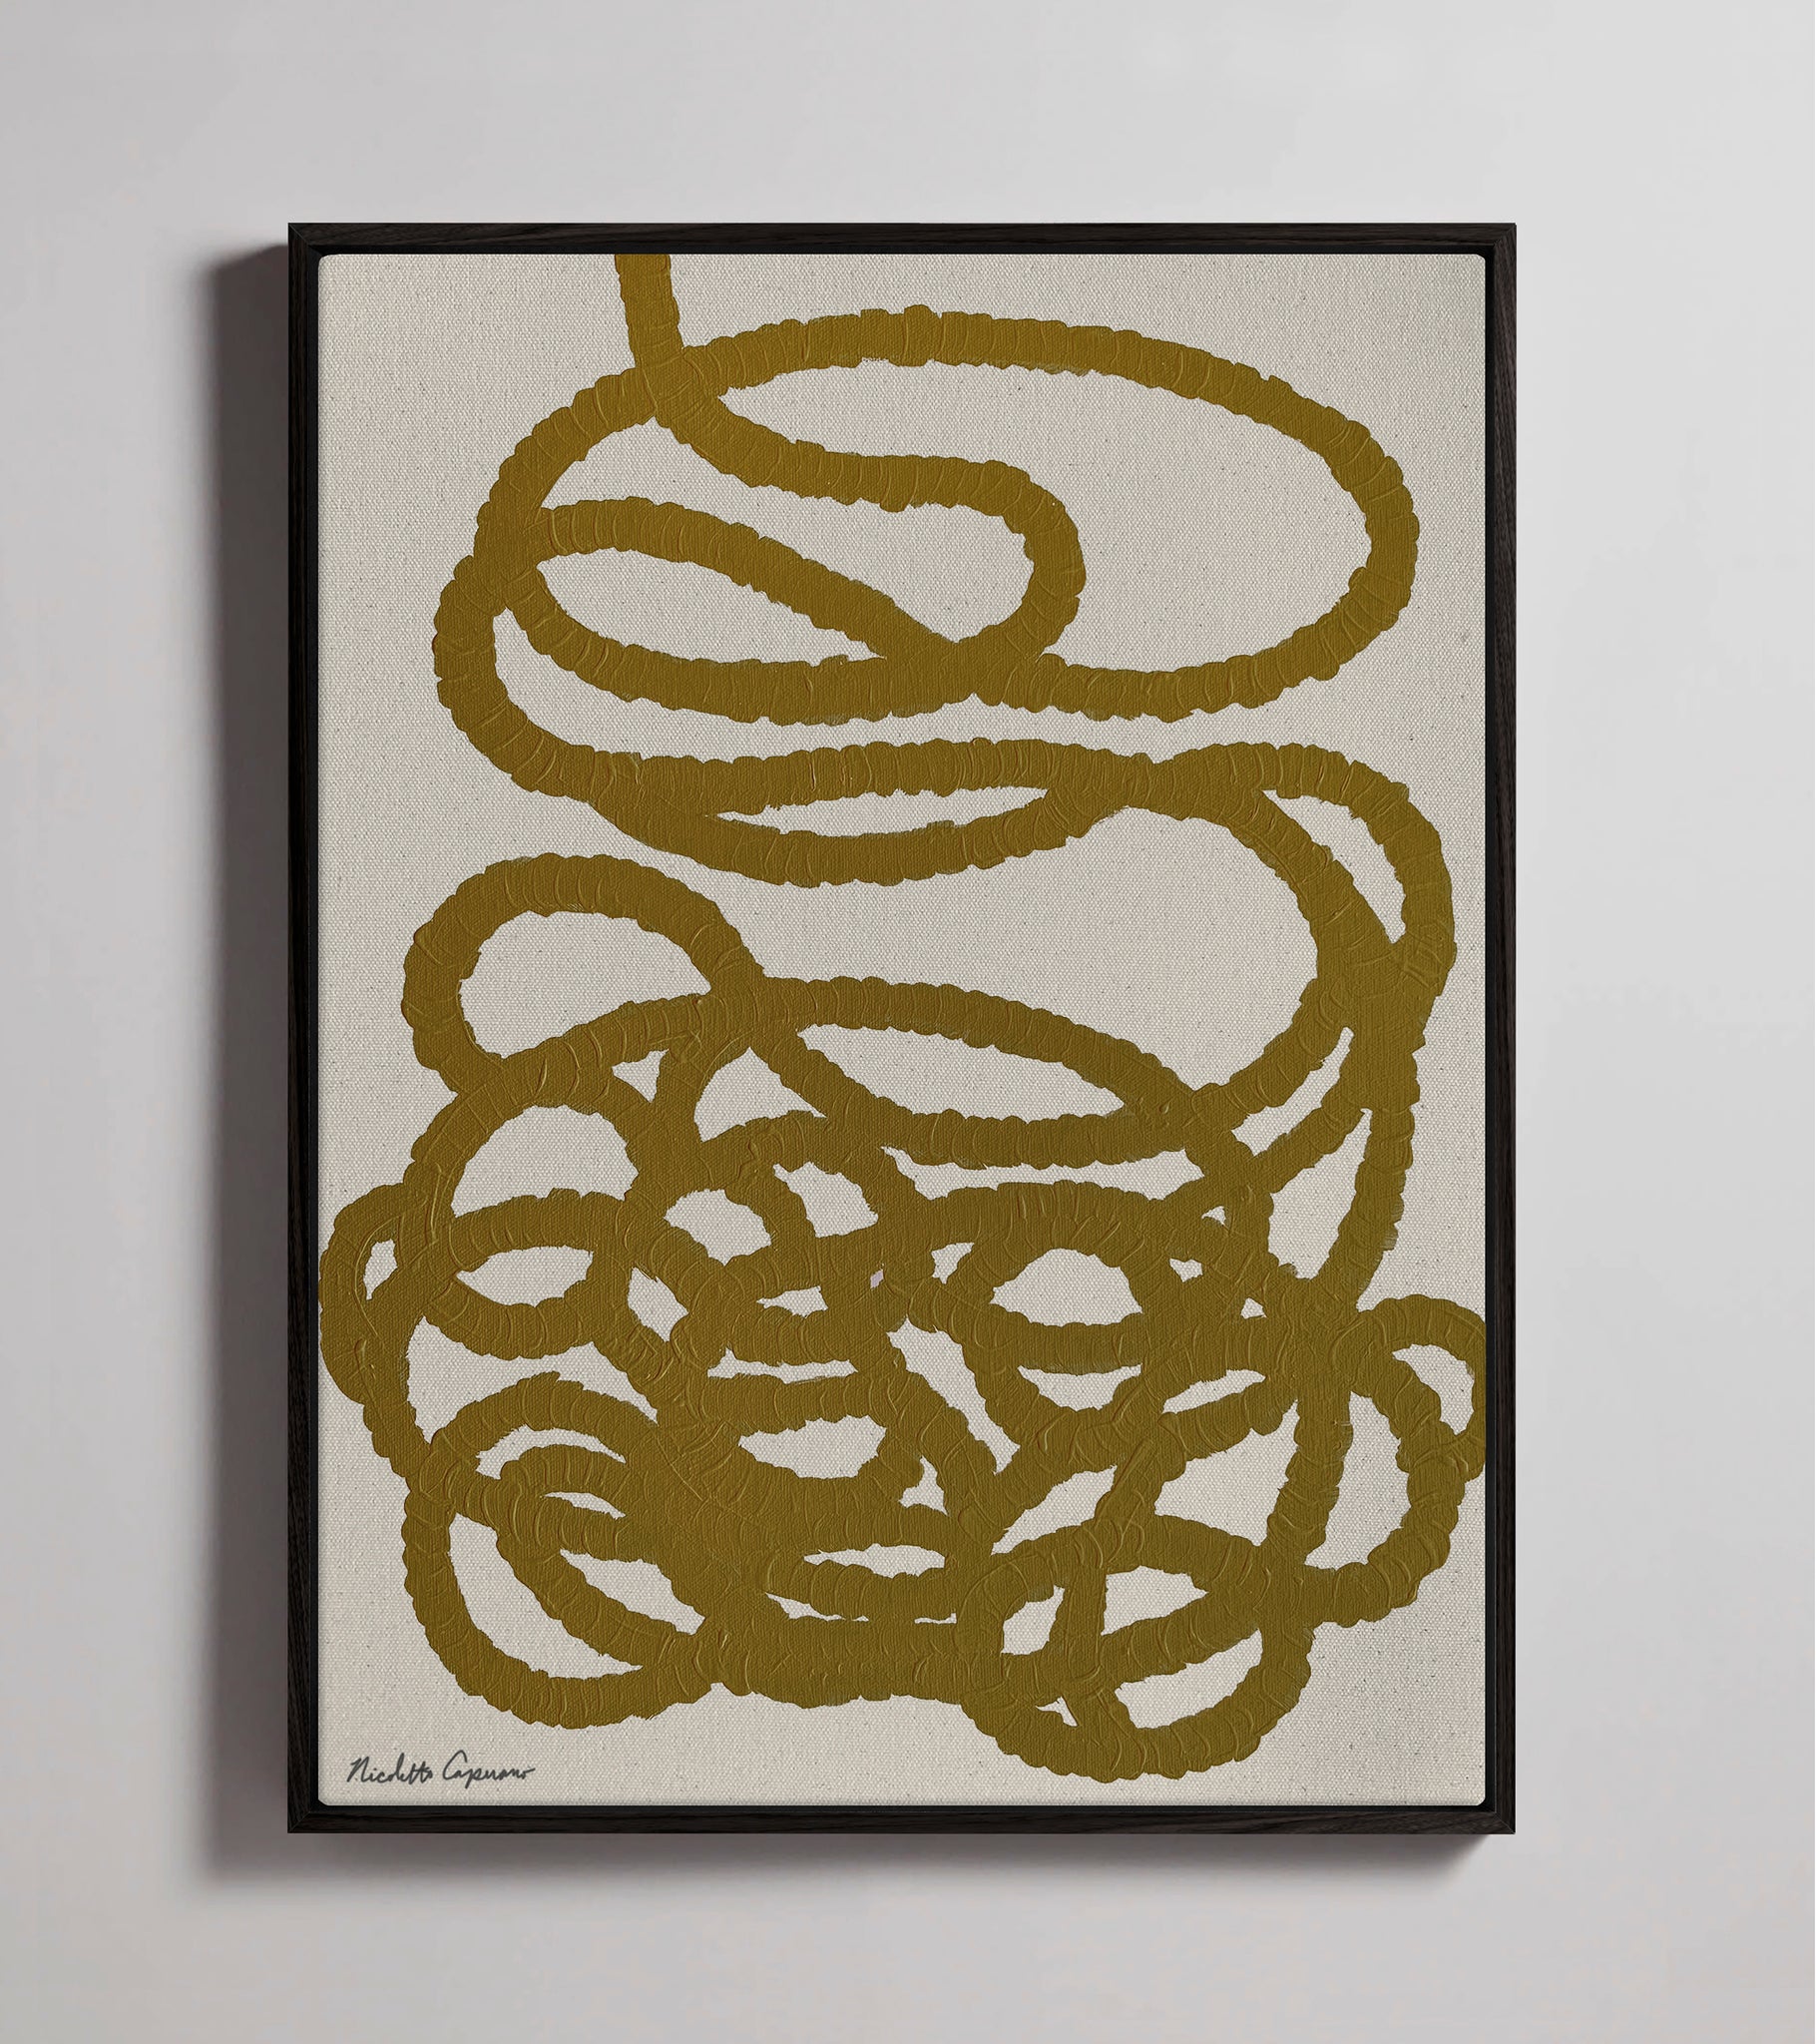 "Abstract Squiggle in Yellow Ochre"